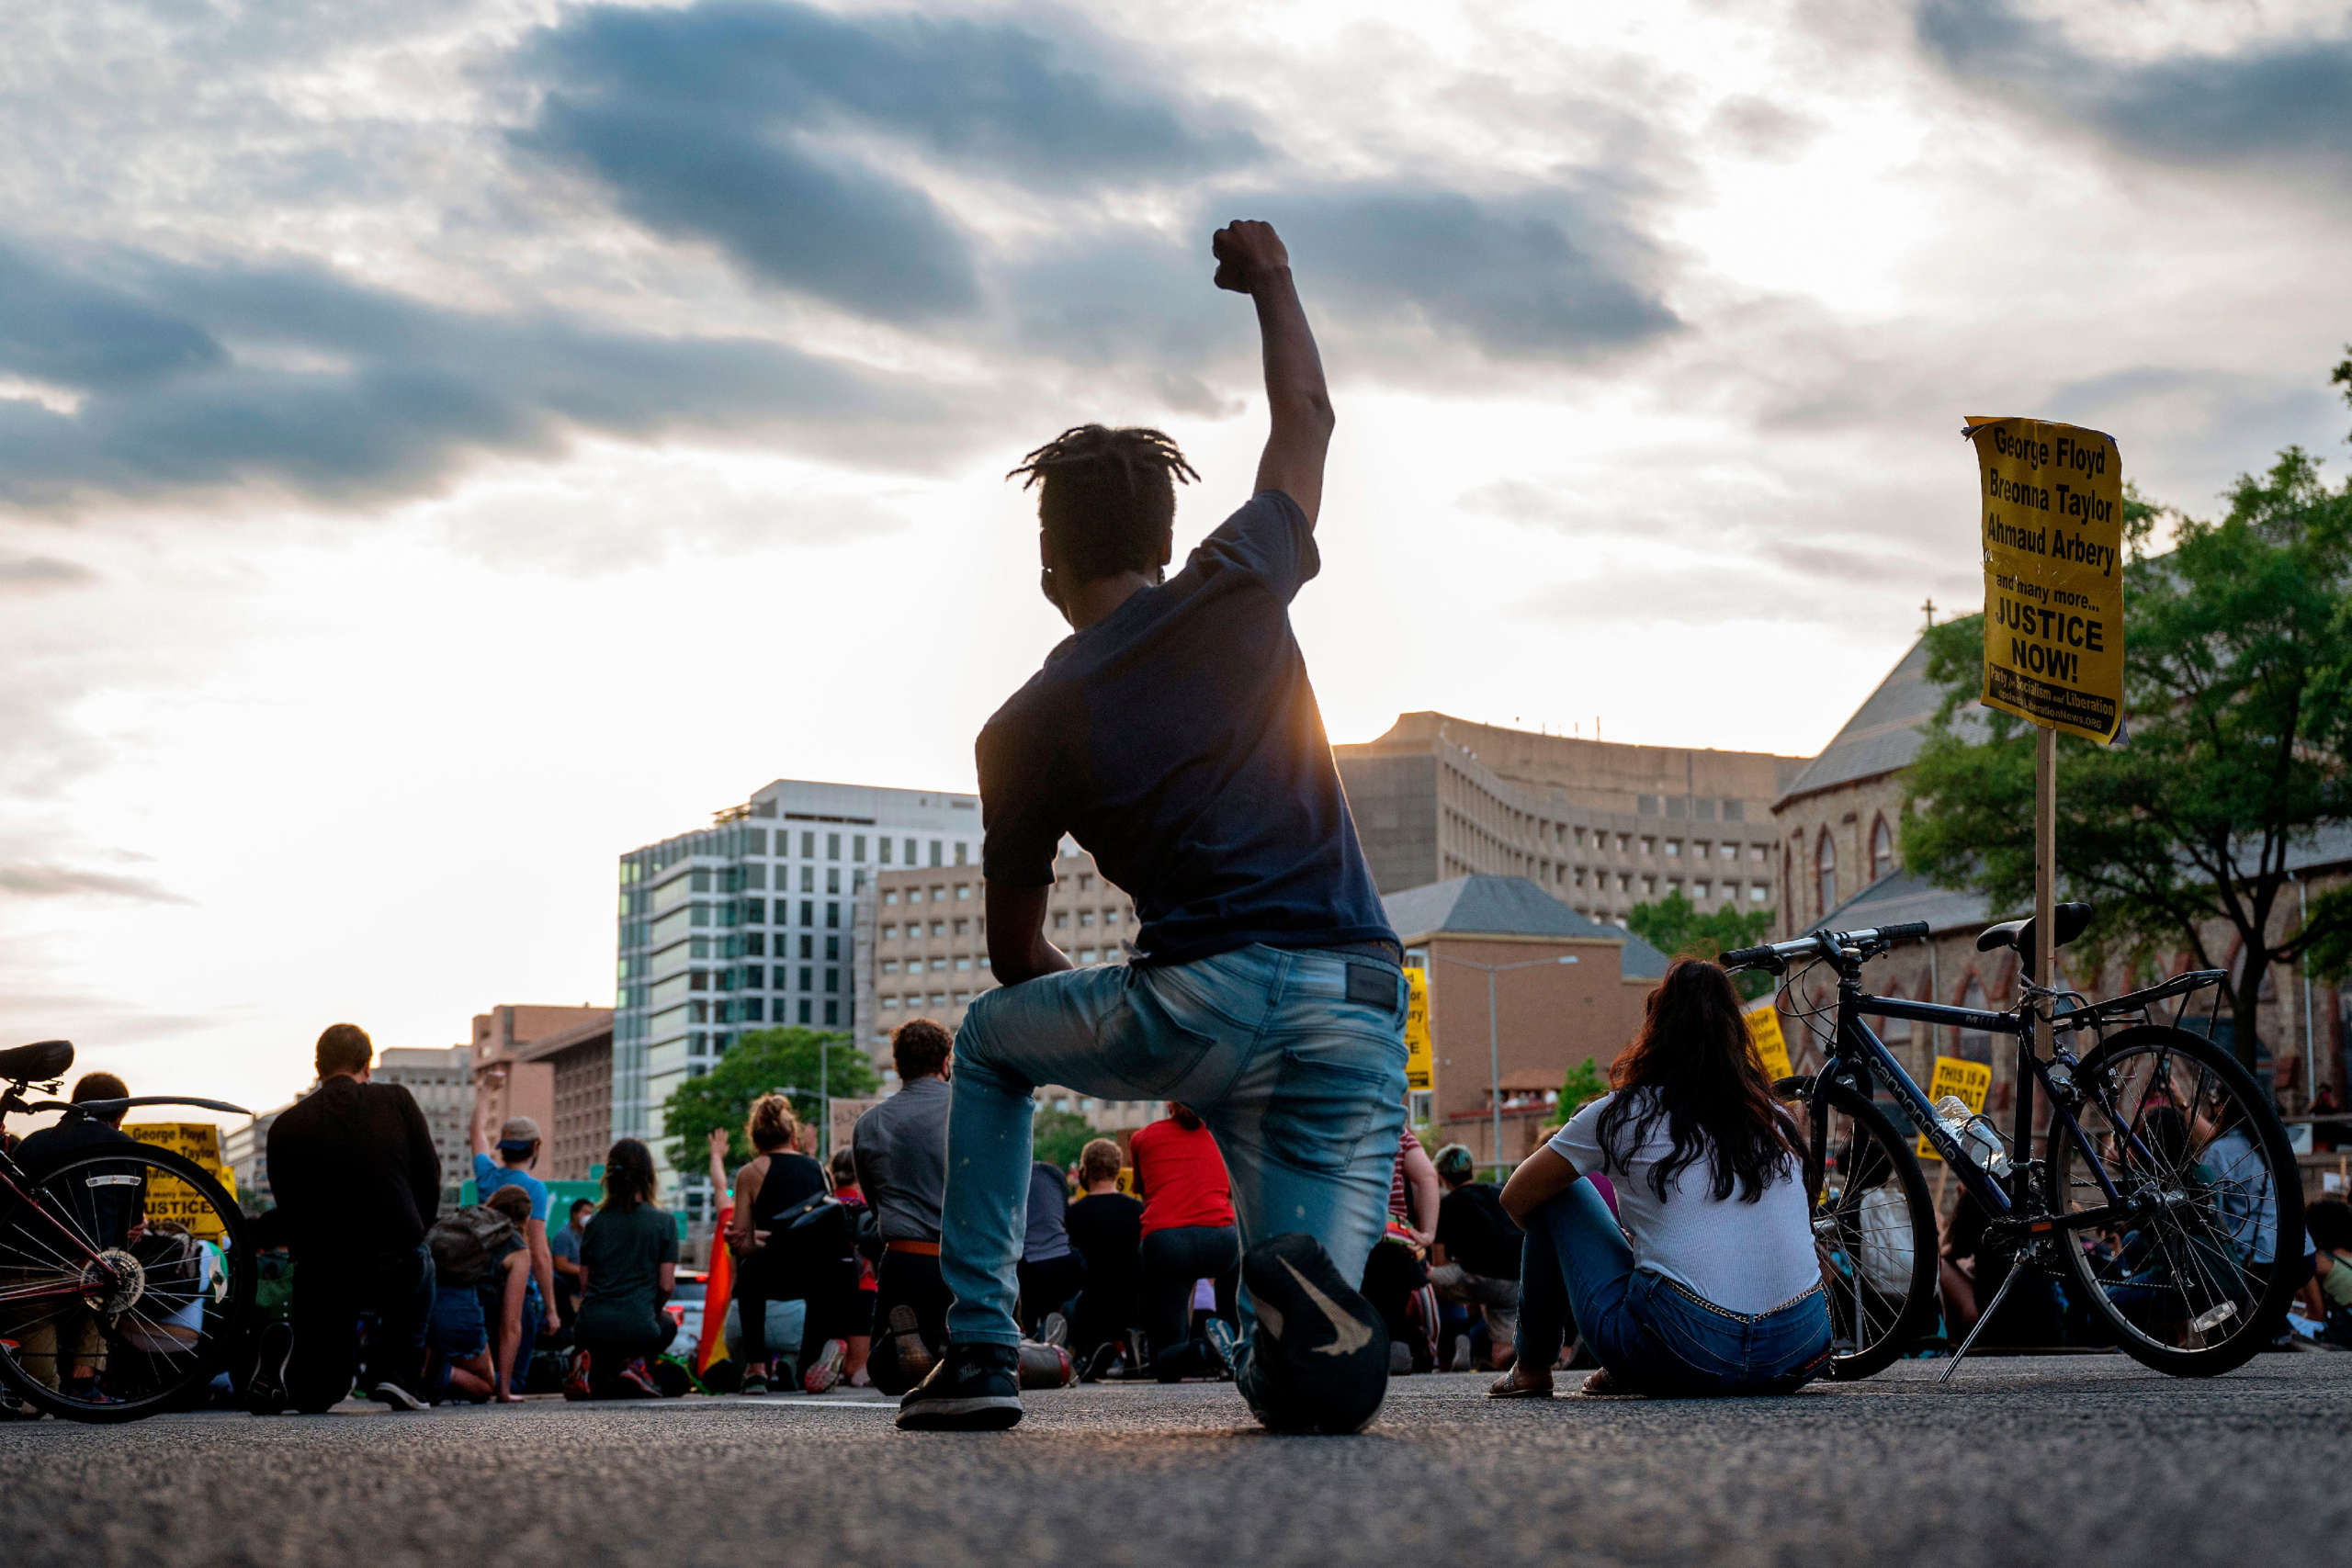 A protester kneels and holds up a fist as he and others demonstrate against the death of George Floyd by closing down and blocking traffic on I-395 in Washington, D.C., on June 15, 2020.